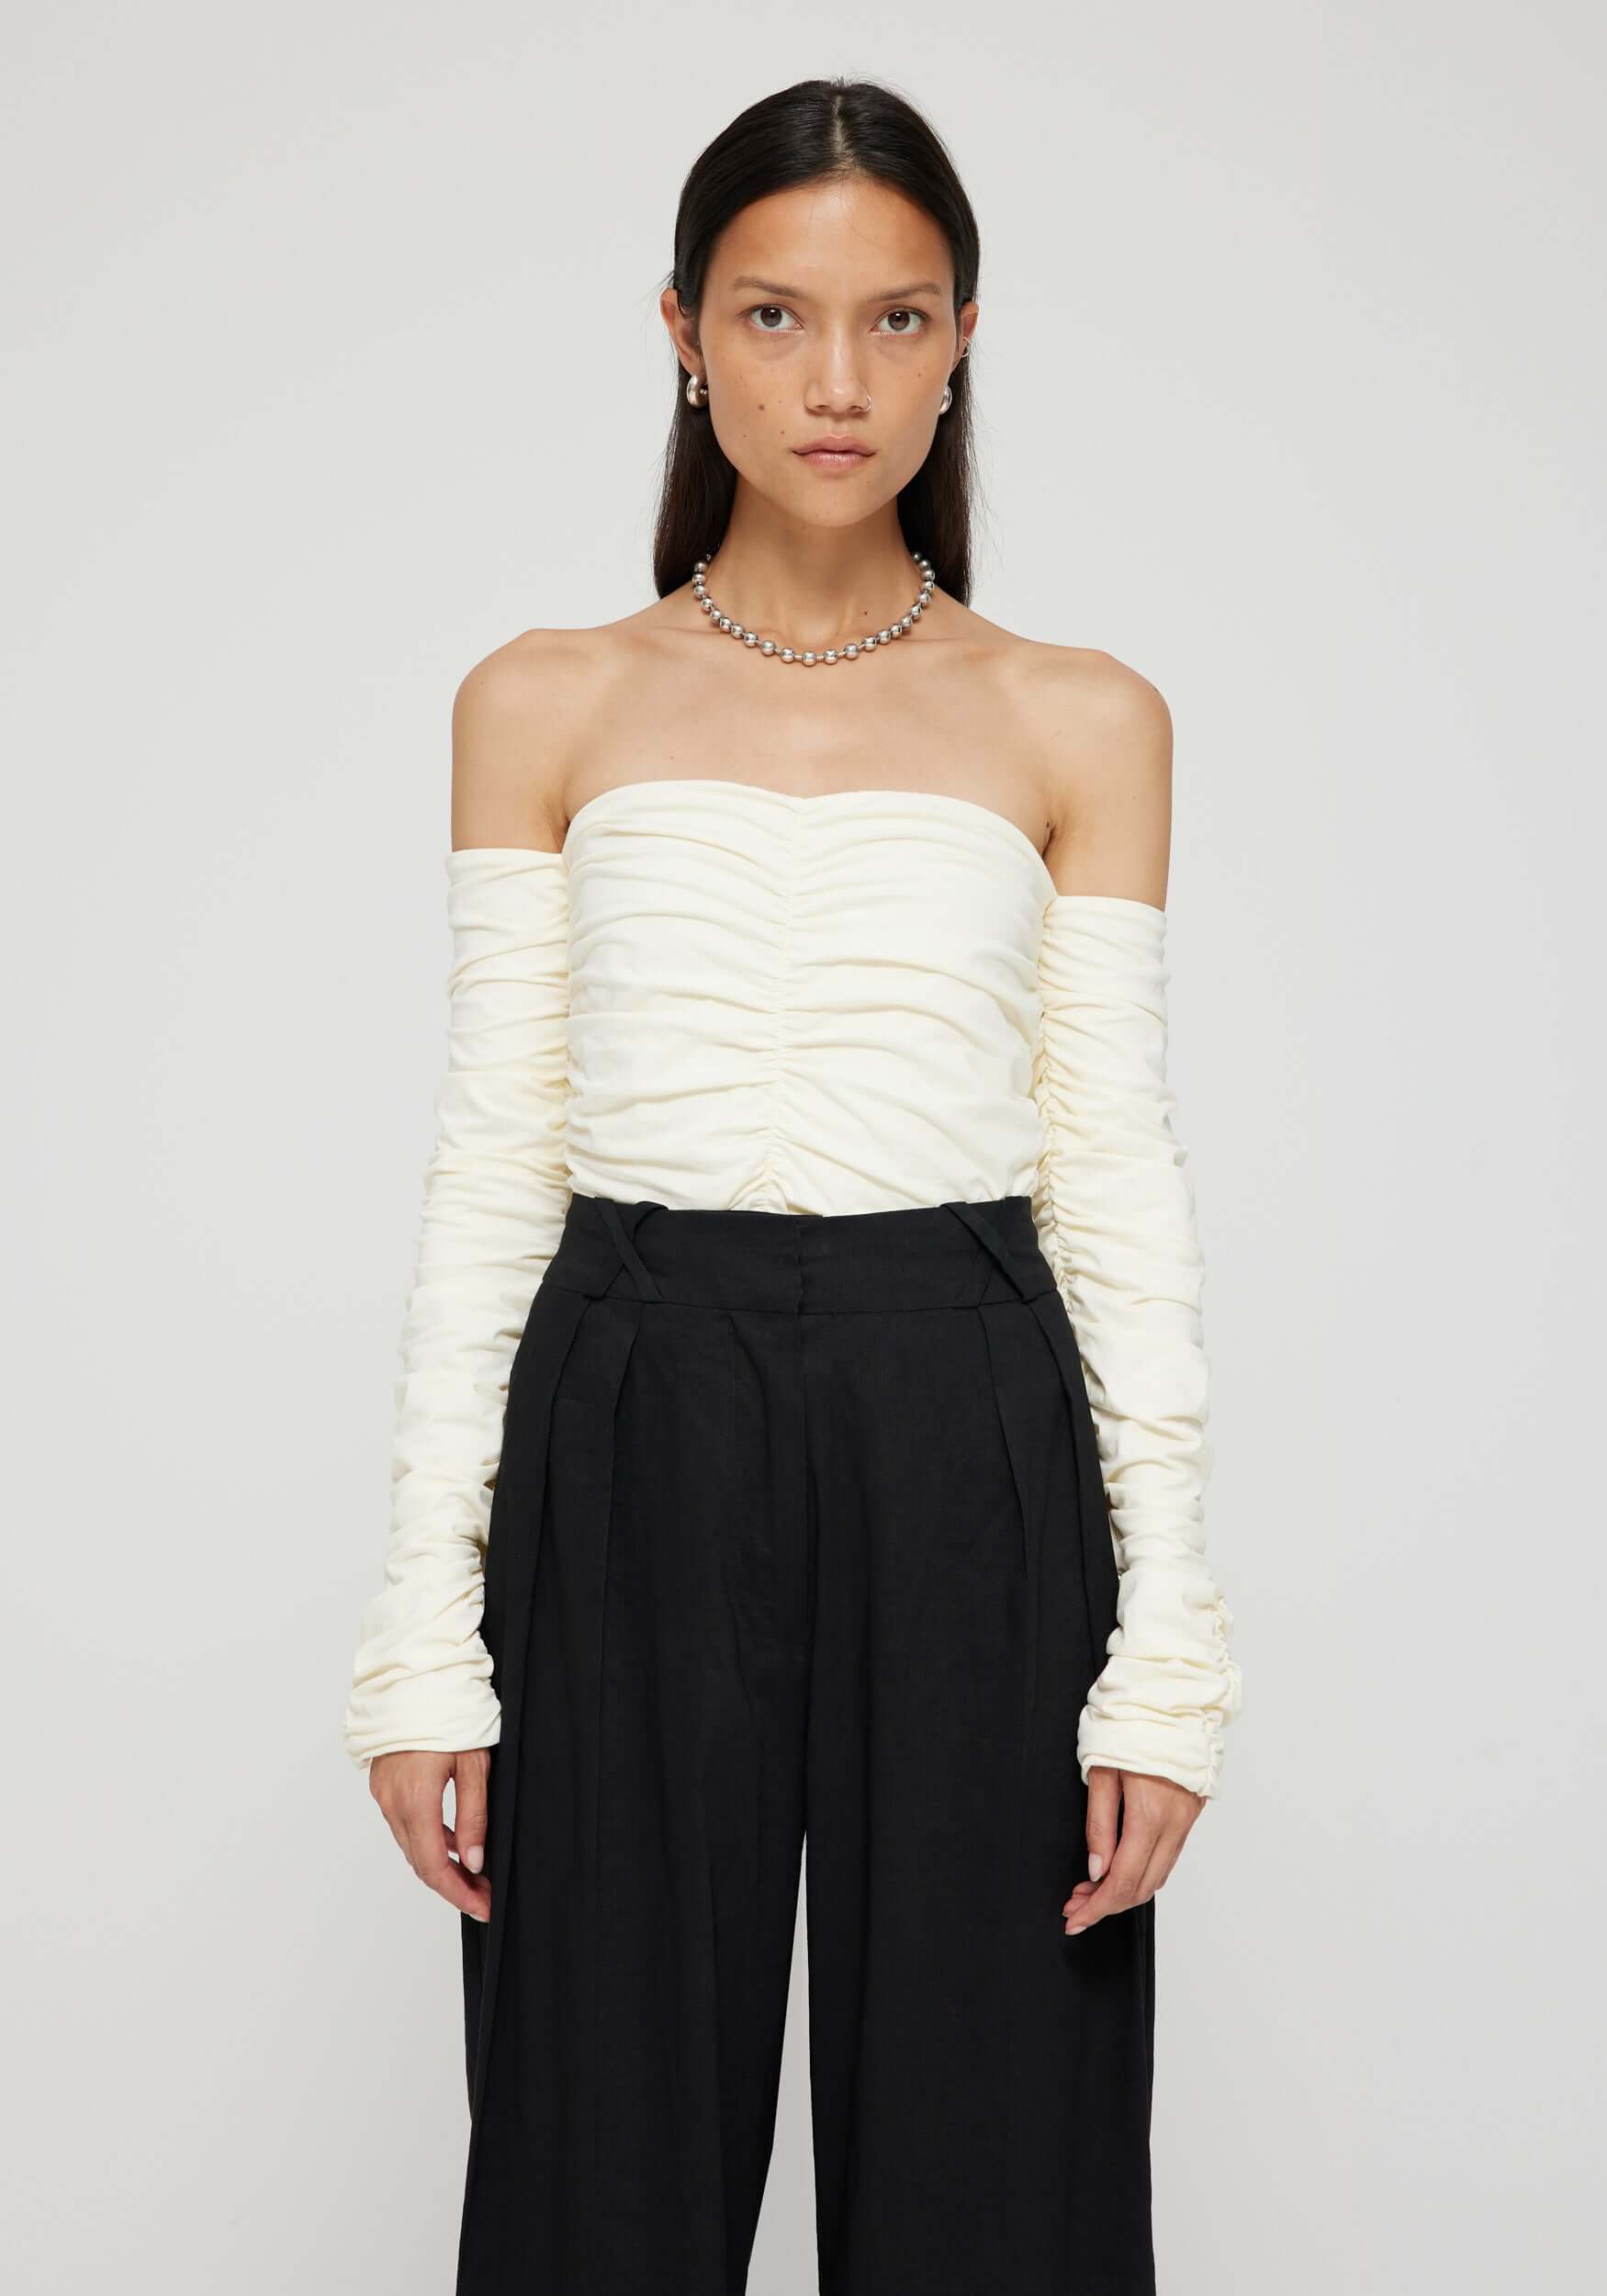 Rohe Smocked Off Shoulder Top in Off-White available at TNT The New Trend Australia. Free shipping on orders over $300 AUD.